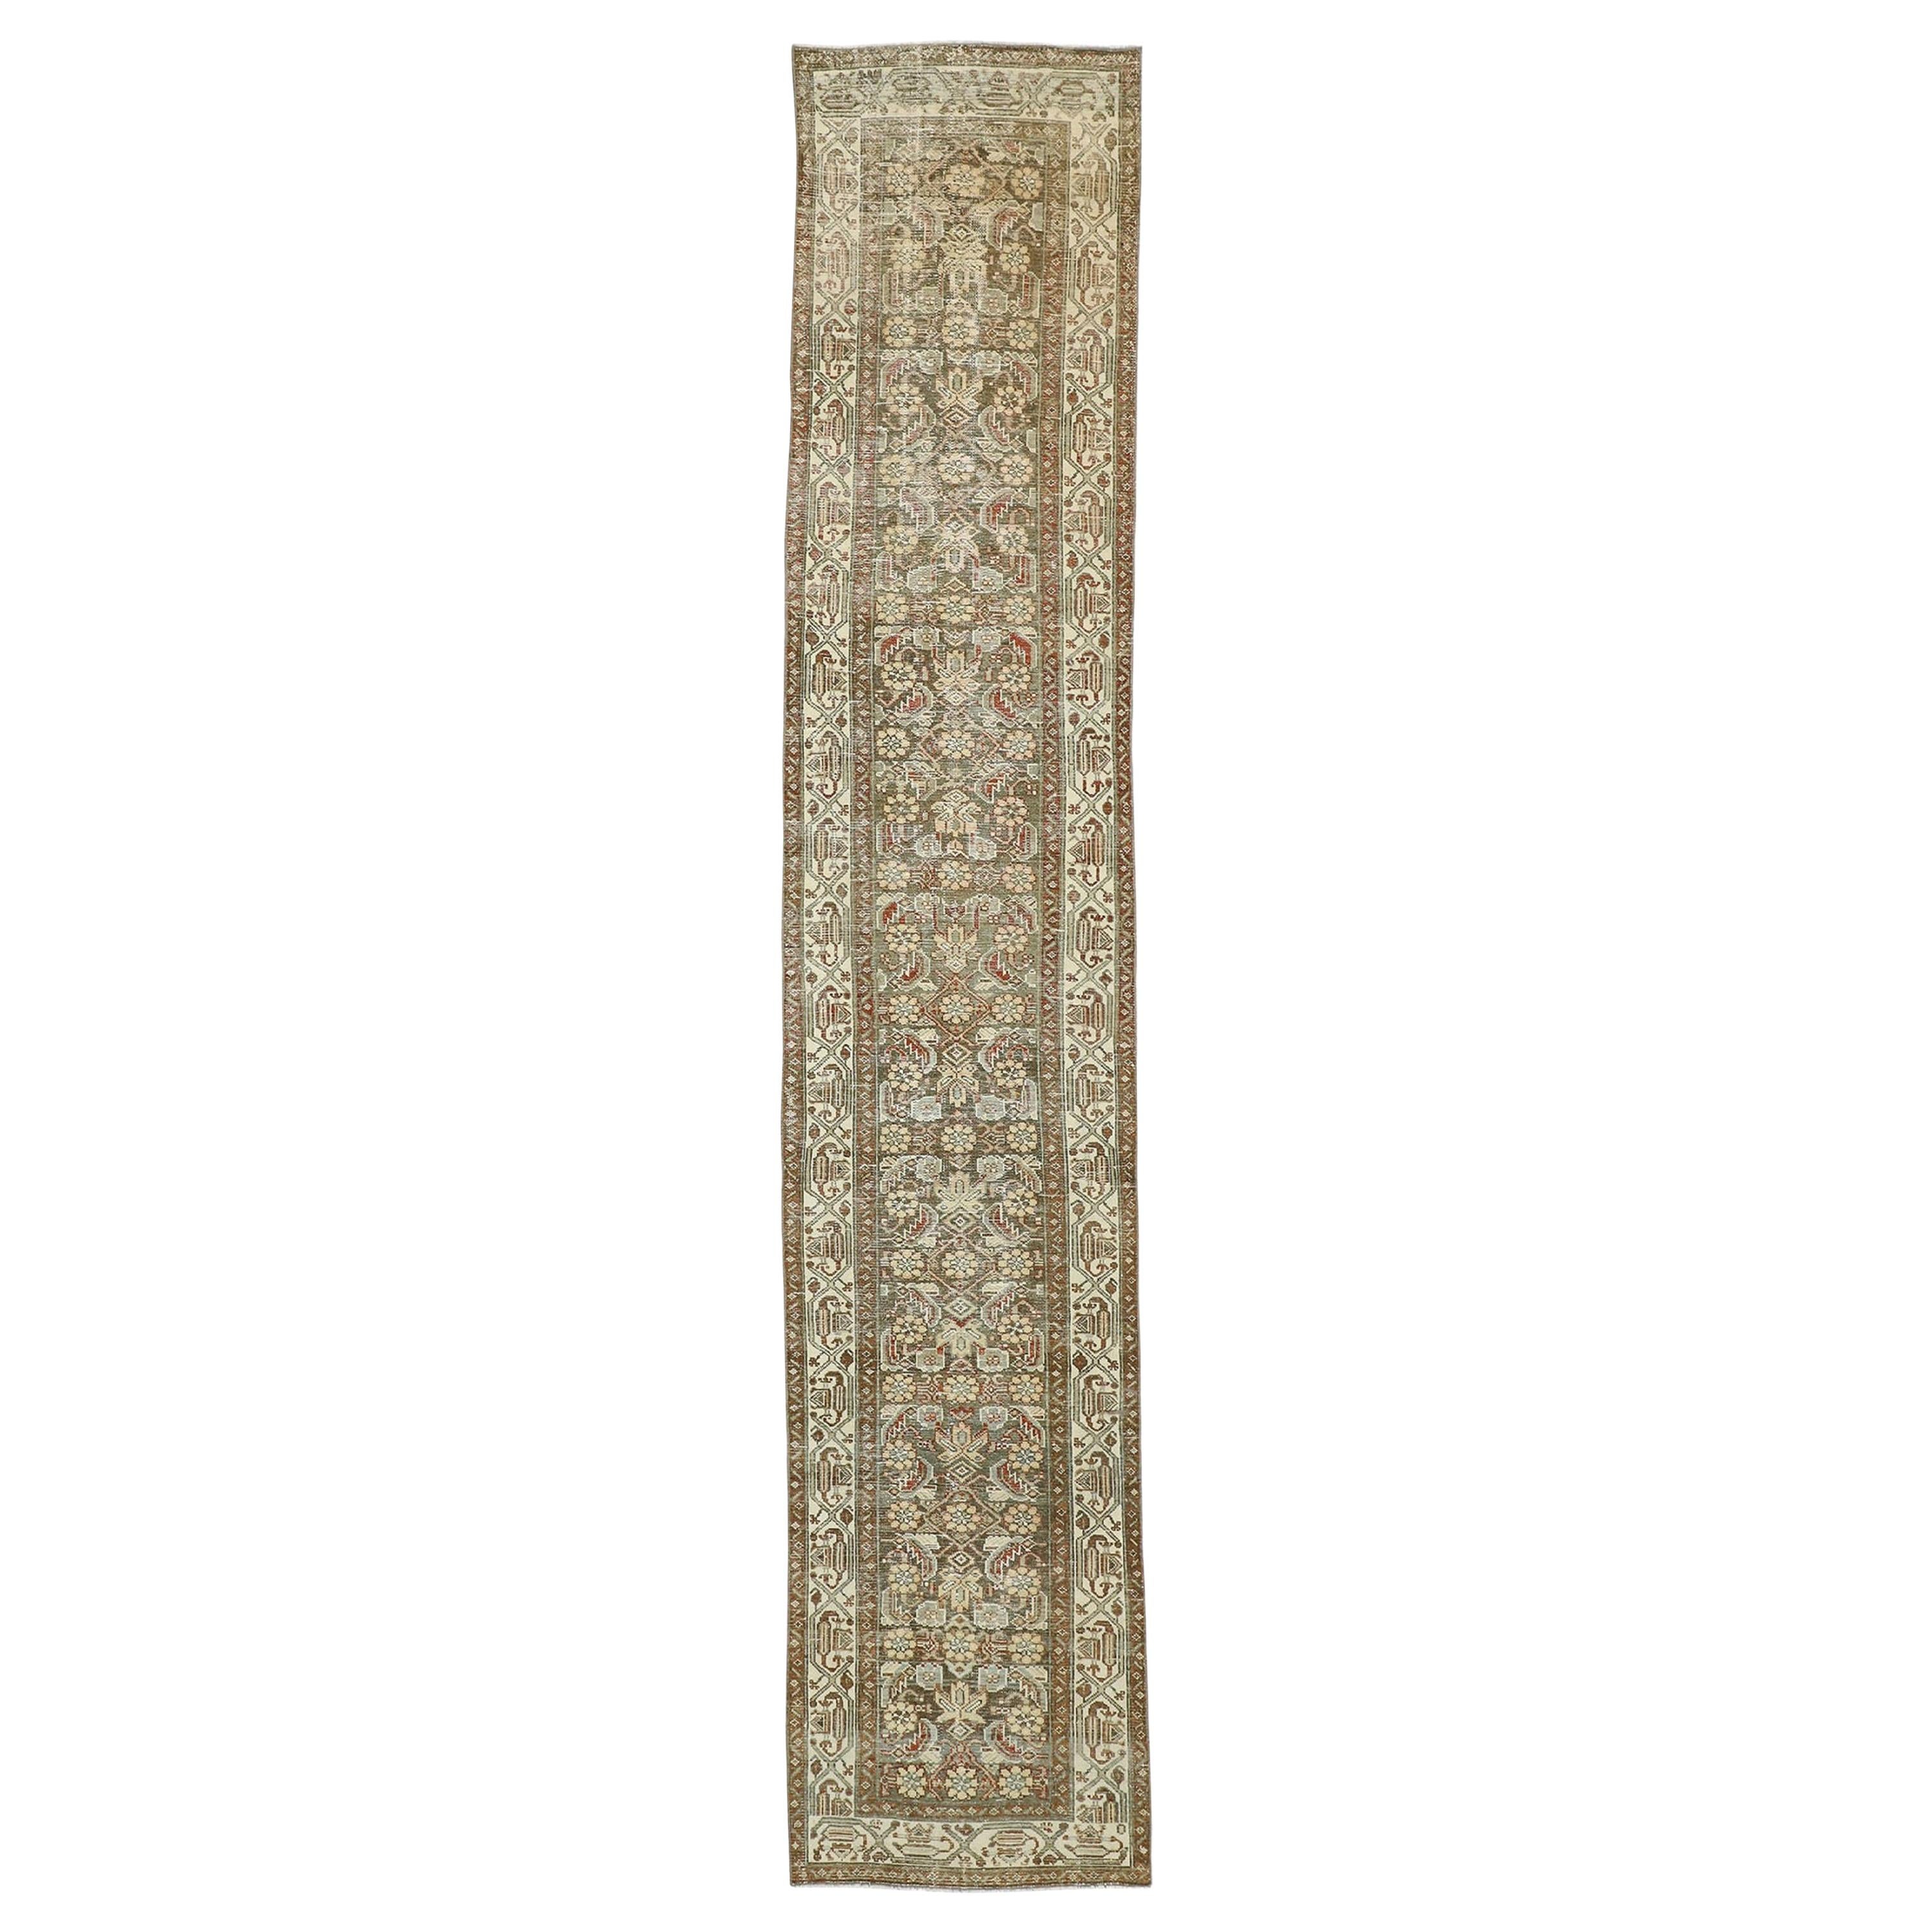 Distressed Antique Persian Malayer Design Runner with Rustic Craftsman Style